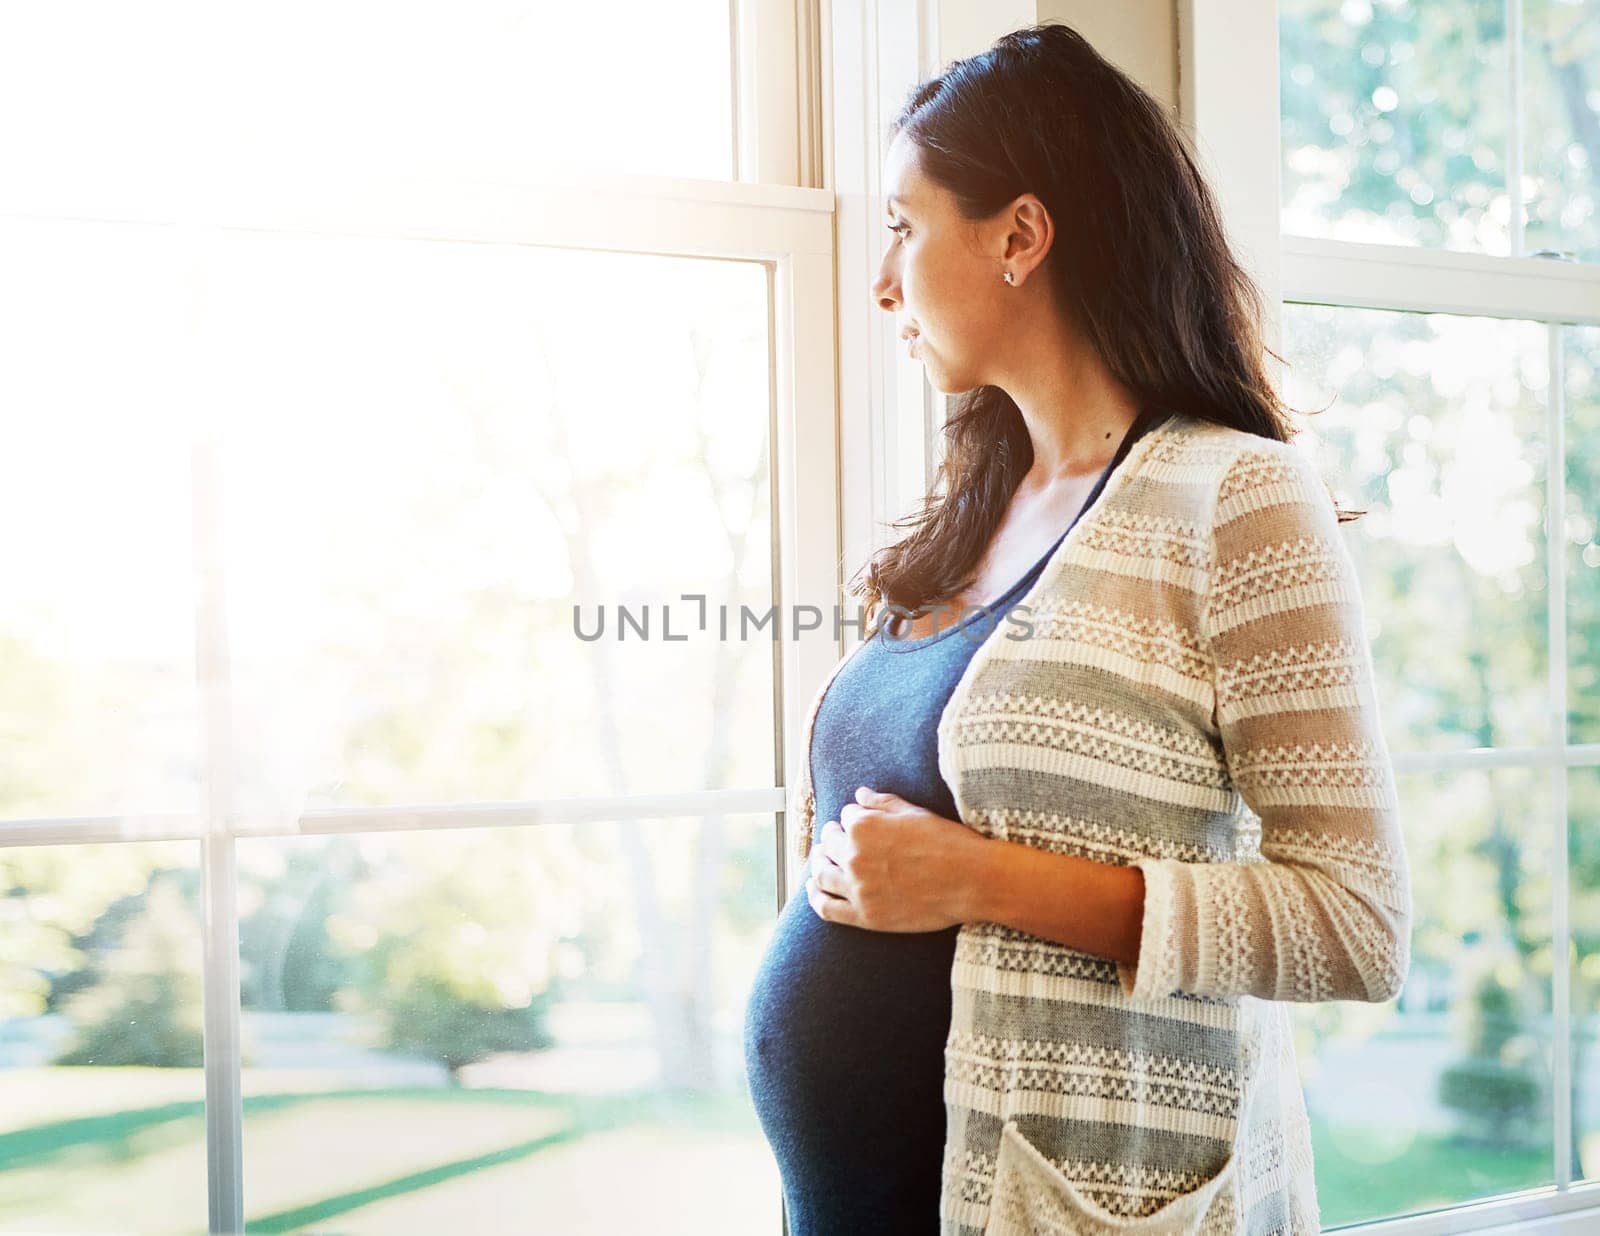 Woman, pregnant and thinking on future at window, hope and maternity, love and hands on stomach. Mother, healthy and care for baby, prenatal wellness and support in motherhood, home and family by YuriArcurs